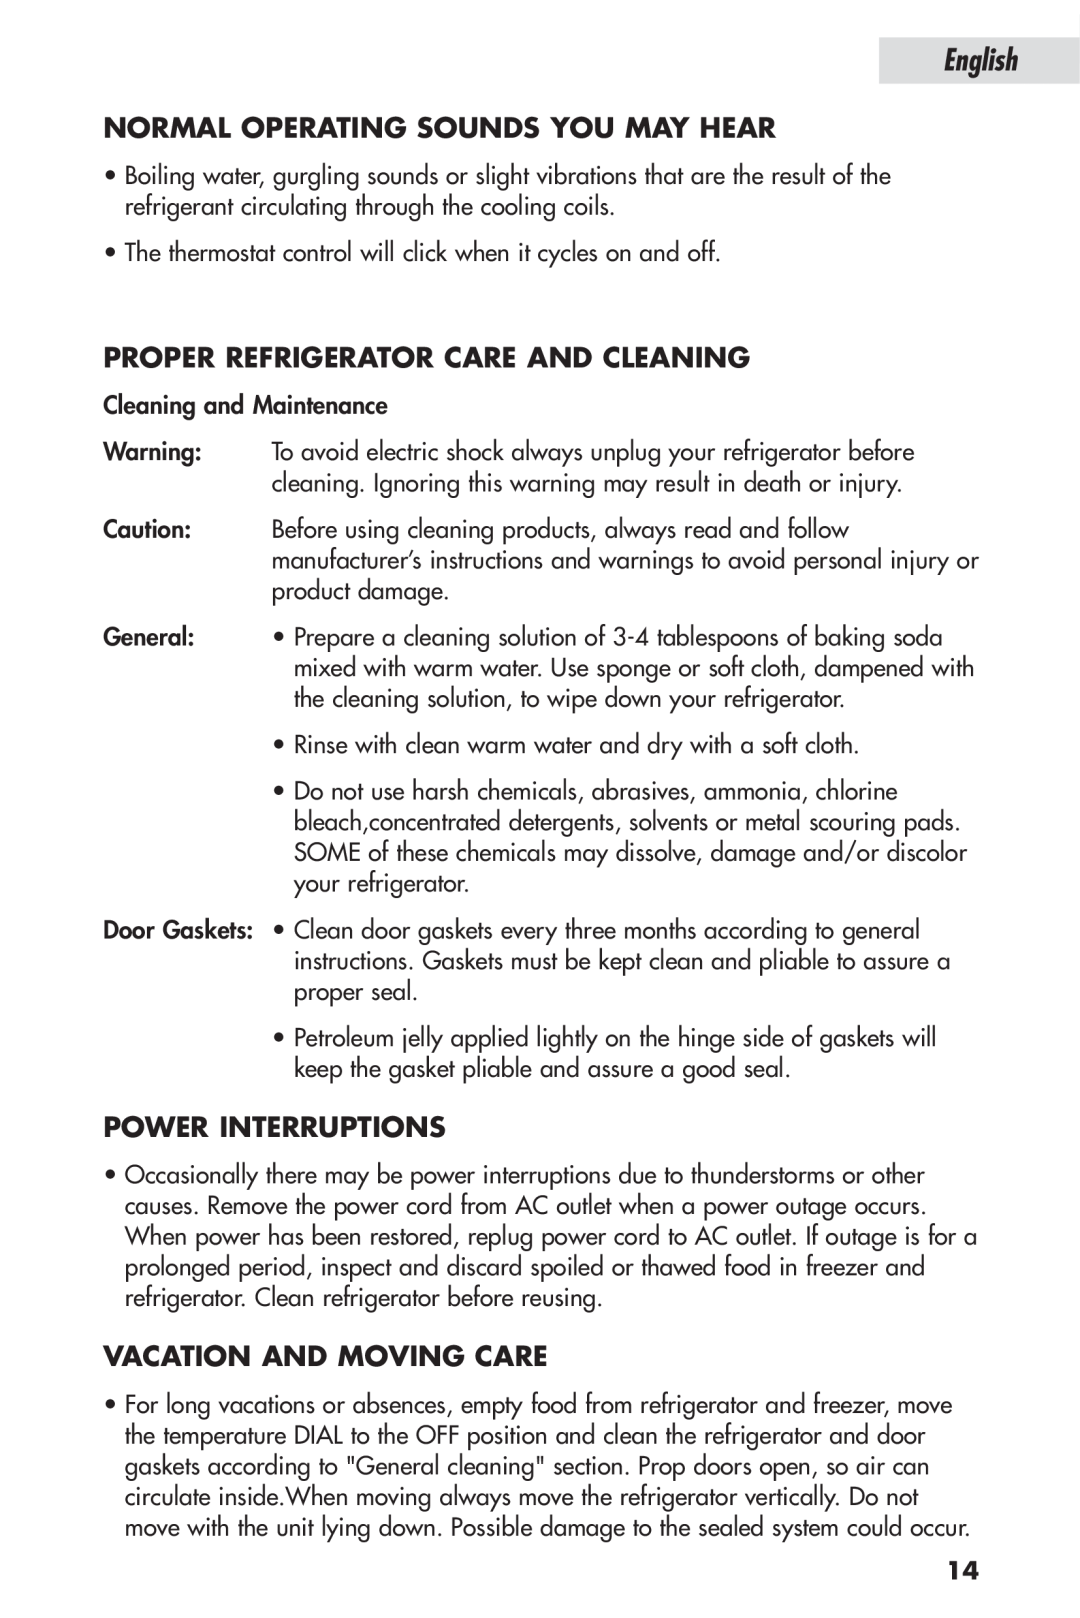 Haier HSP04WNB Normal Operating Sounds You May Hear, Proper Refrigerator Care And Cleaning, Power Interruptions, English 